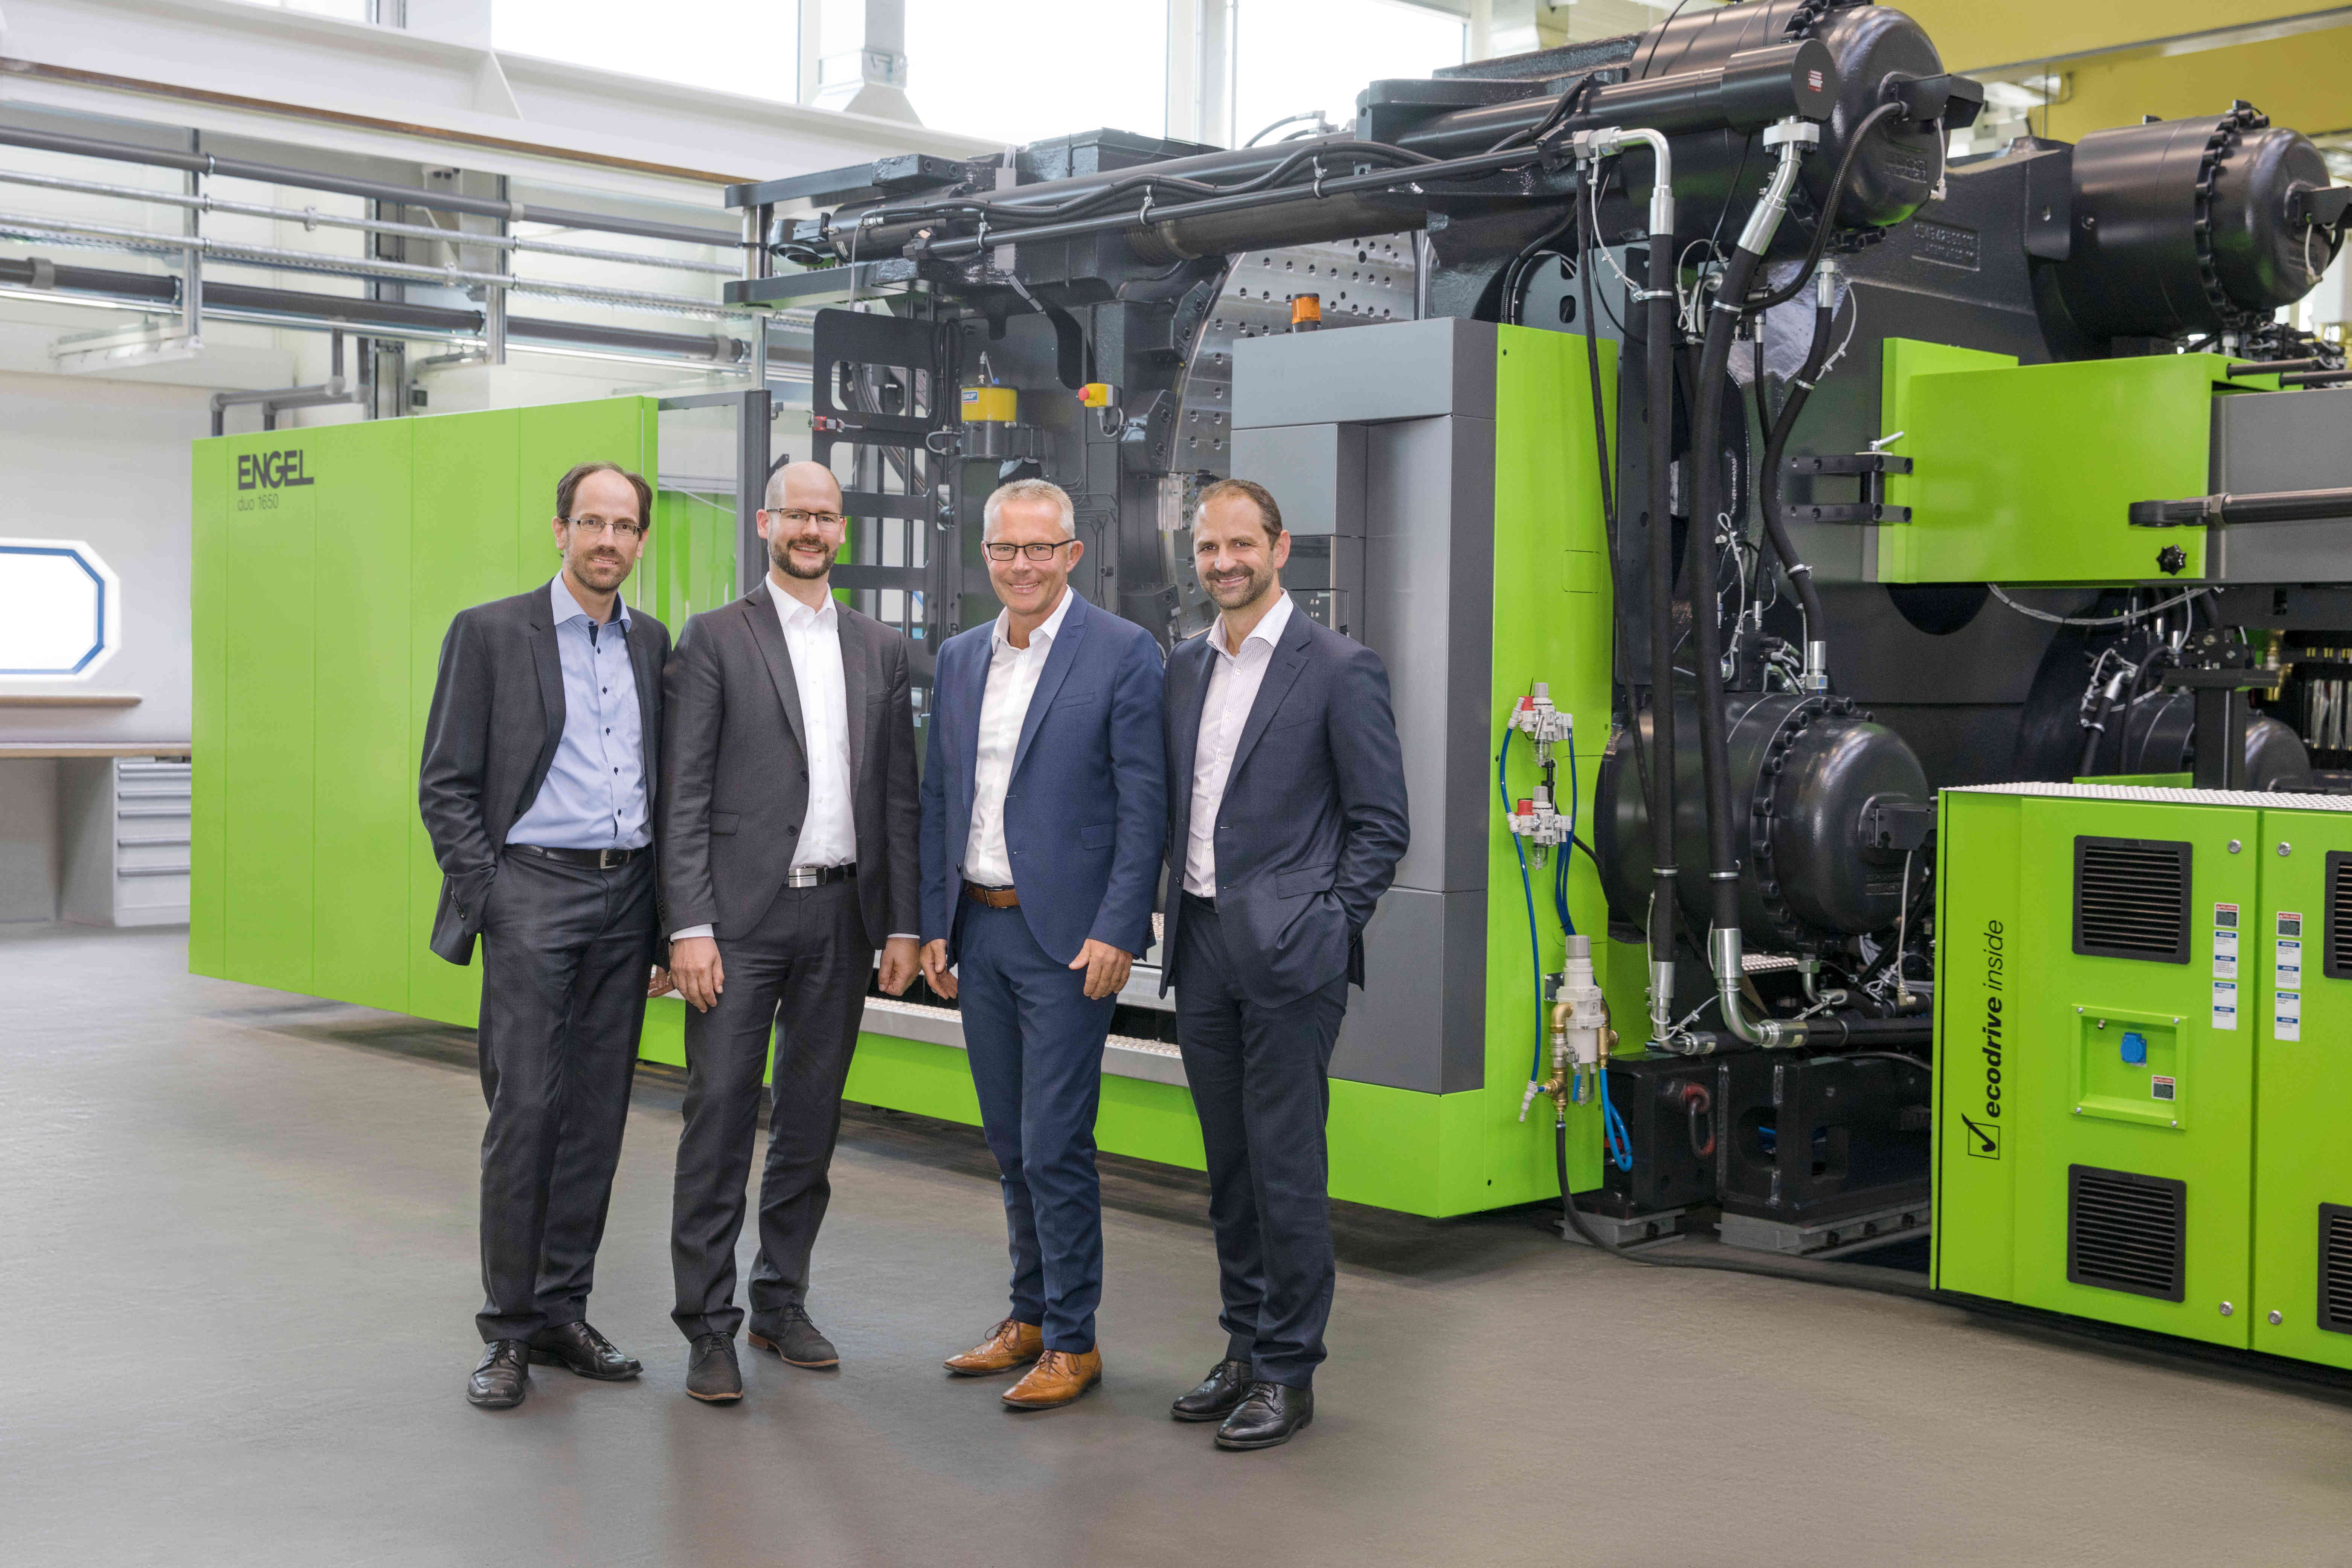 From left to right: Dr Norbert Müller, head of the Engel Technology Centre for Lightweight Composites, Dr Michael Emonts, managing director of the Aachen Center, Rolf Saß, general manager of Engel Deutschland GmbH and Dr Christoph Steger chief sales officer at Engel Holding. (Photo courtesy Engel Austria.)